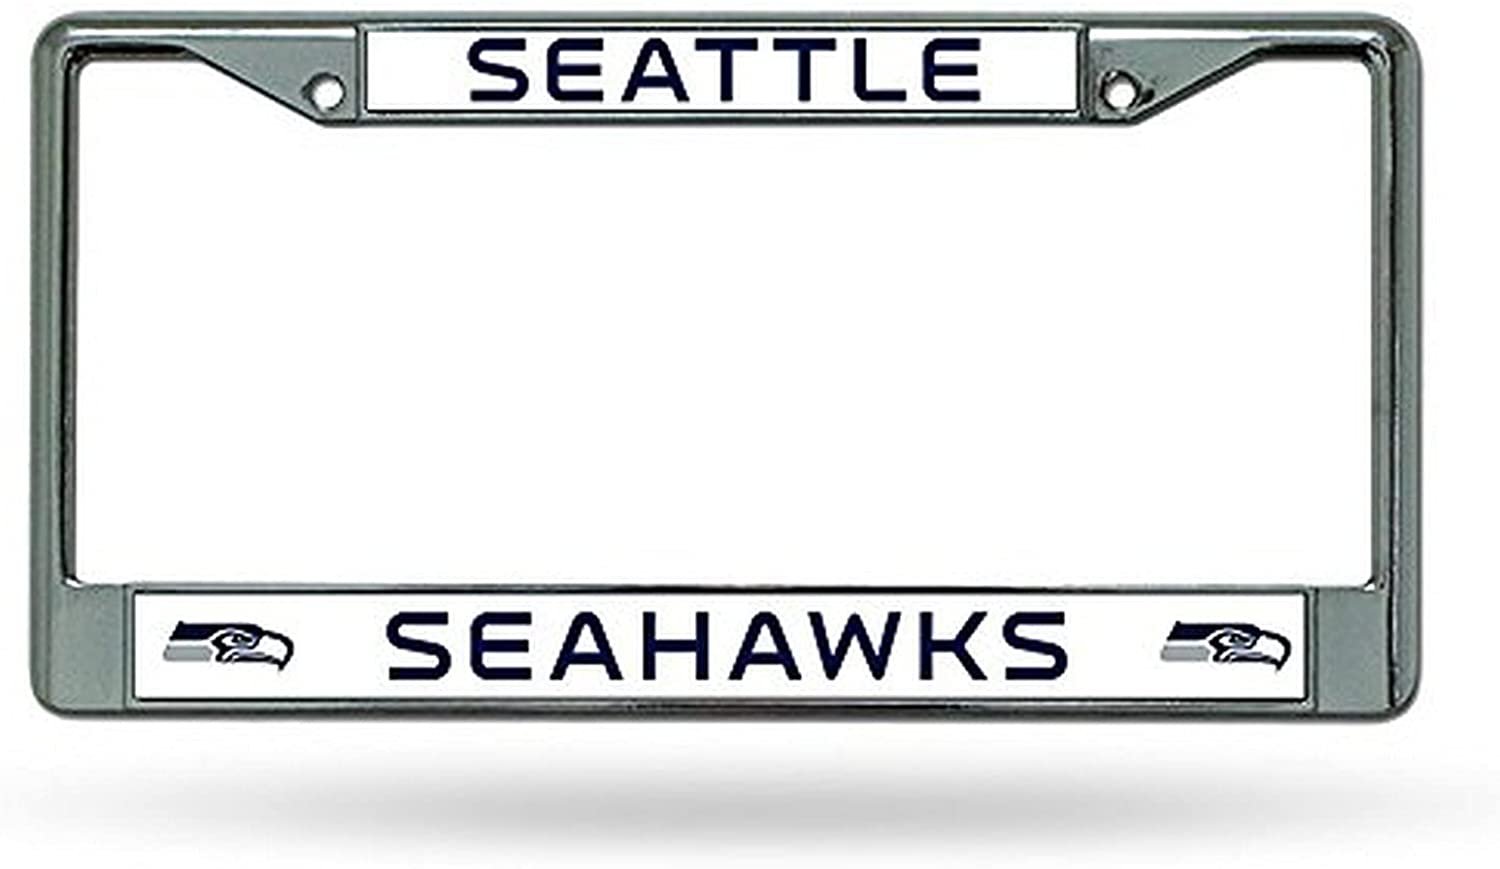 Seattle Seahawks Chrome Metal License Plate Frame Tag Cover, 12x6 Inch